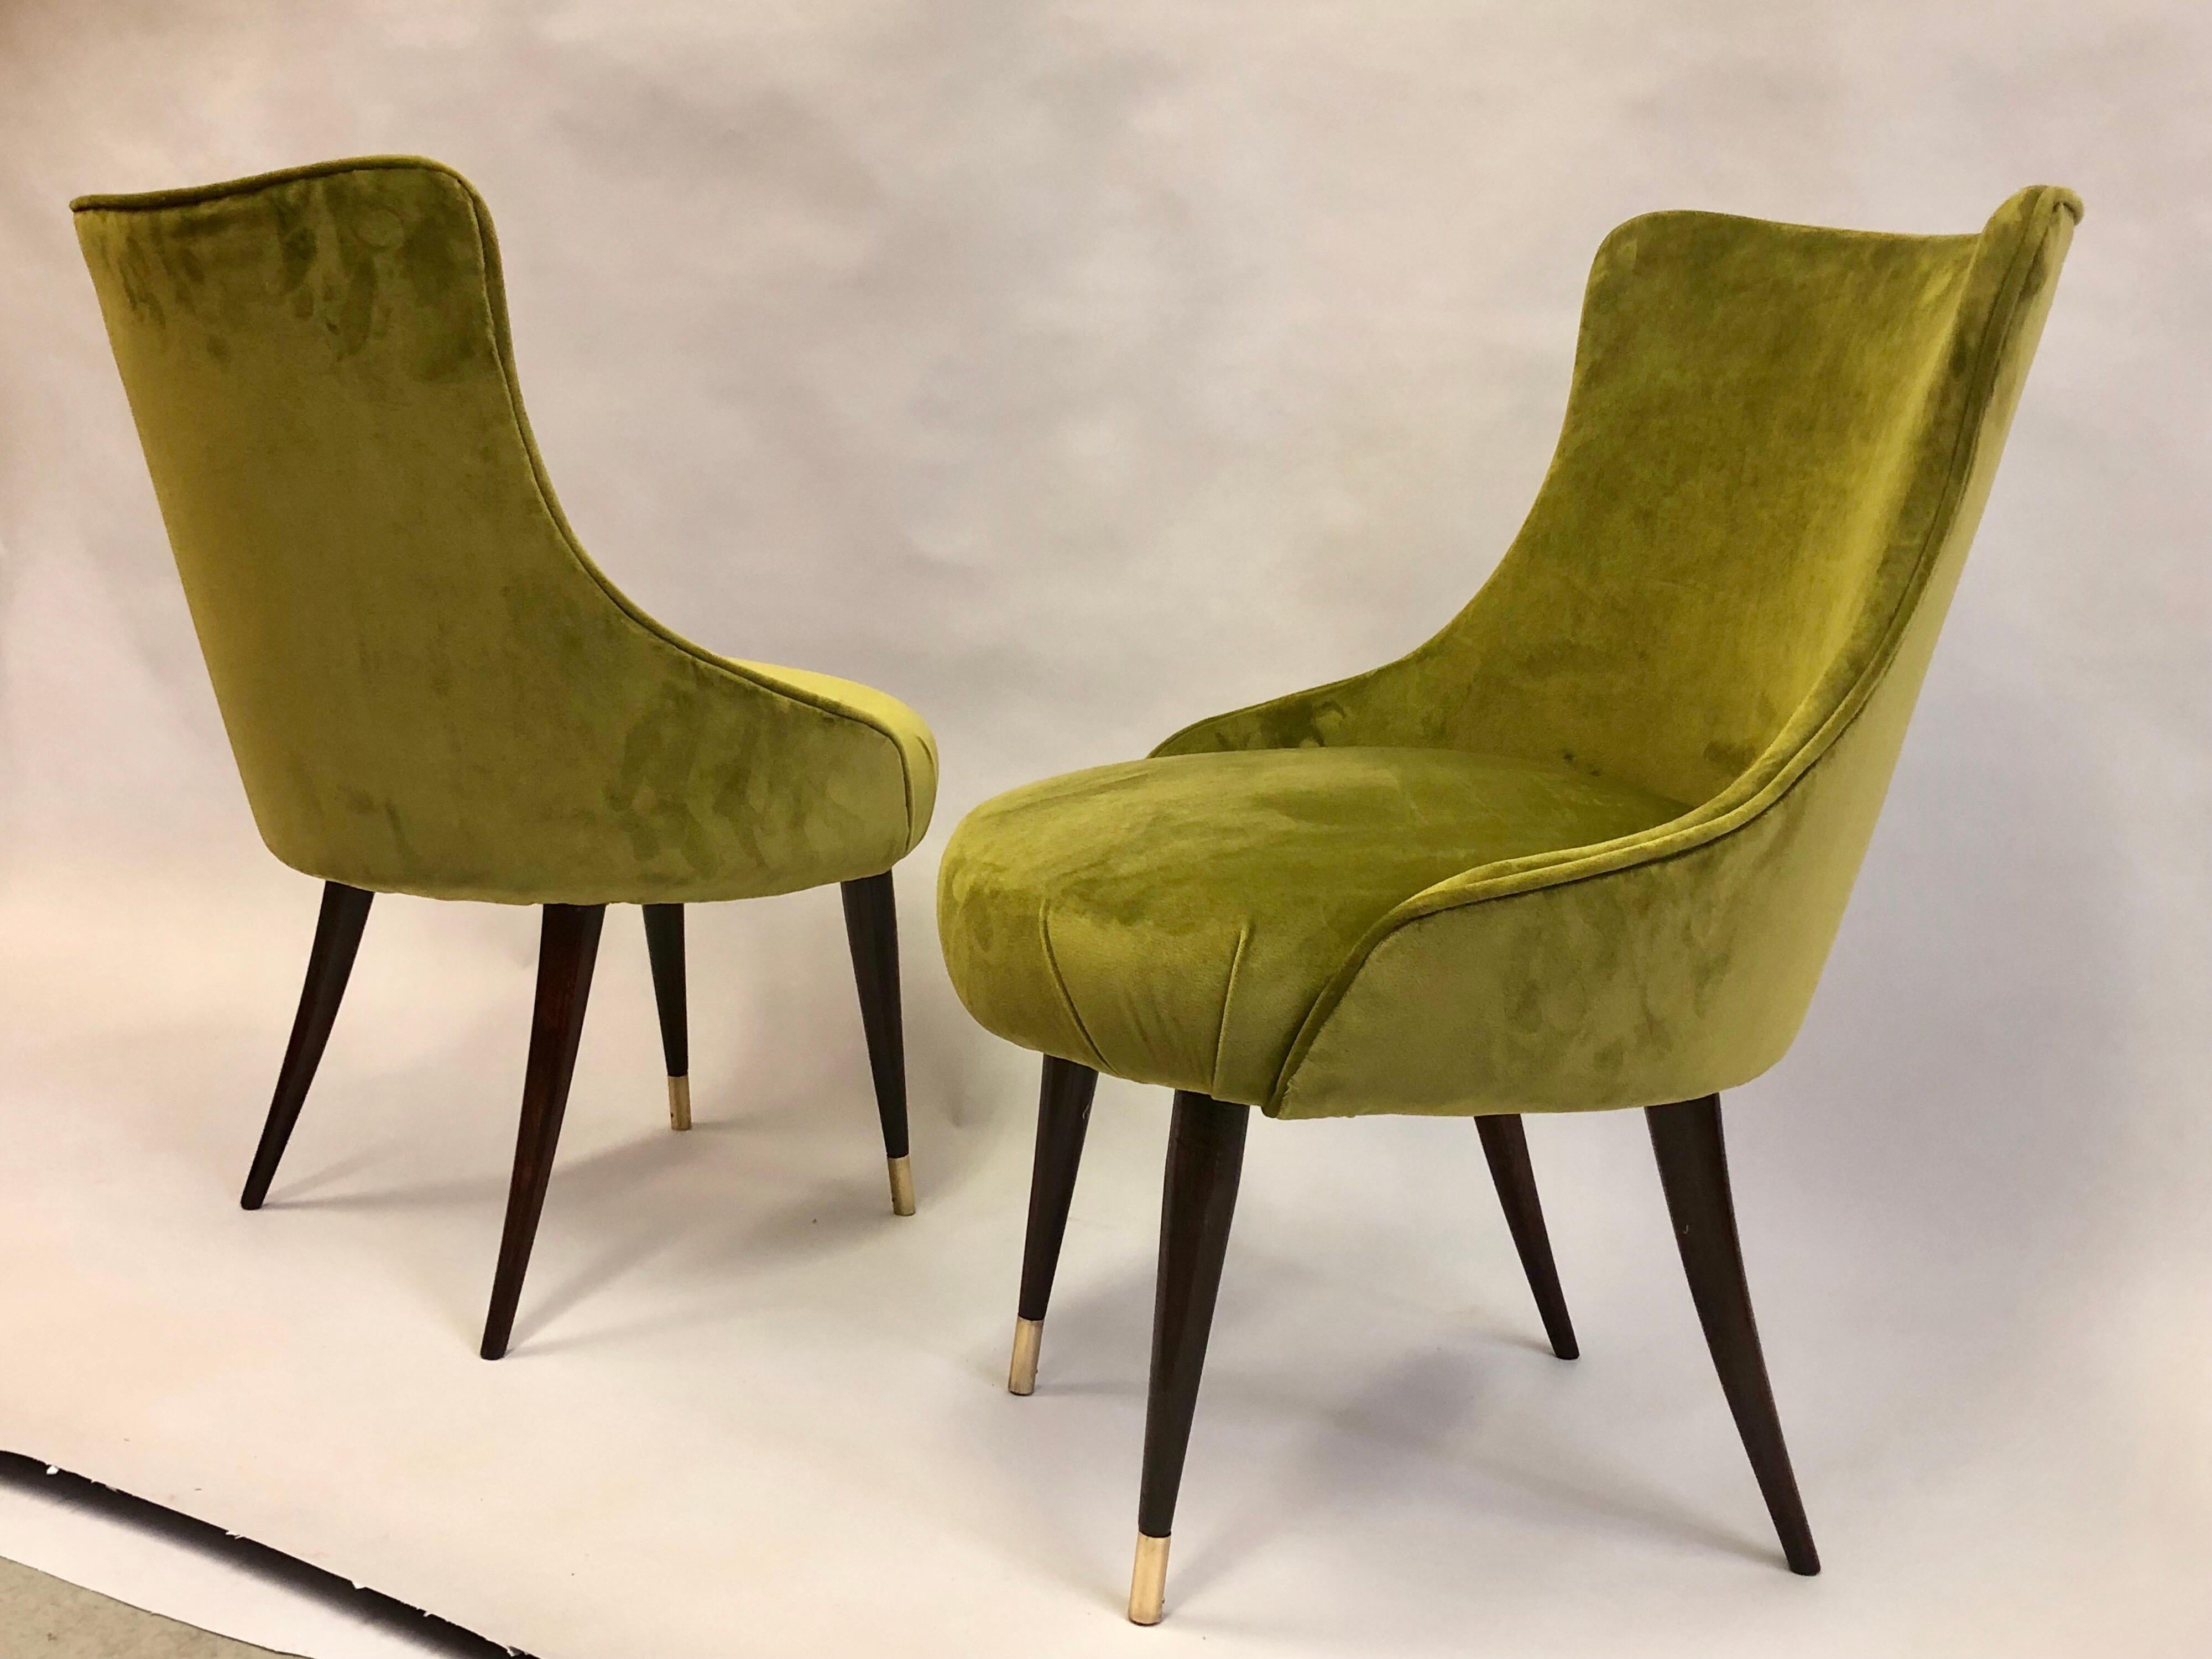 Pair of Italian Mid-Century Modern Lounge / Slipper Chairs by Guglielmo Ulrich For Sale 1